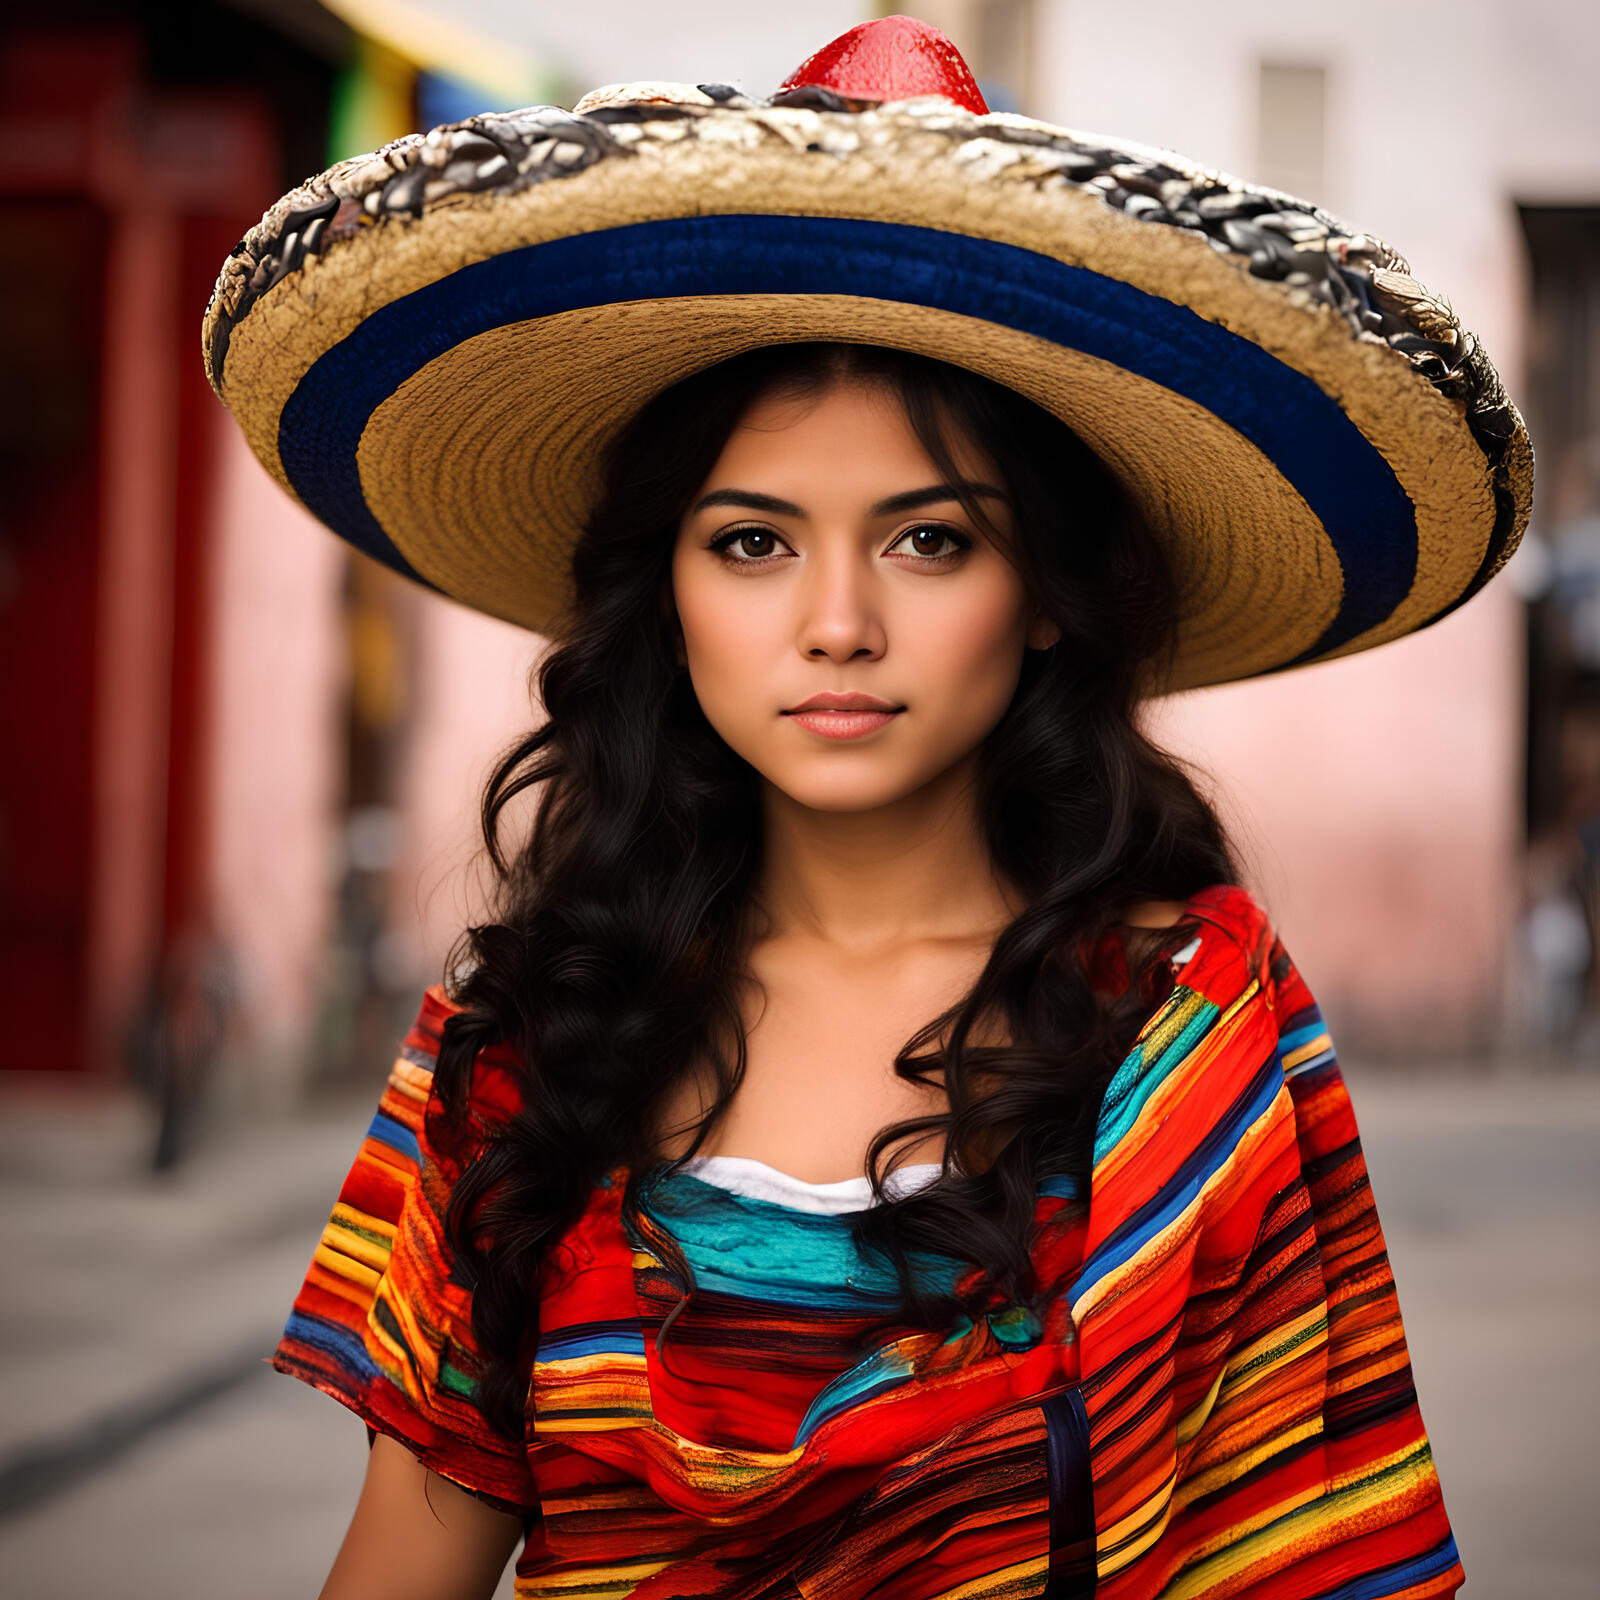 Free photo Mexican girl